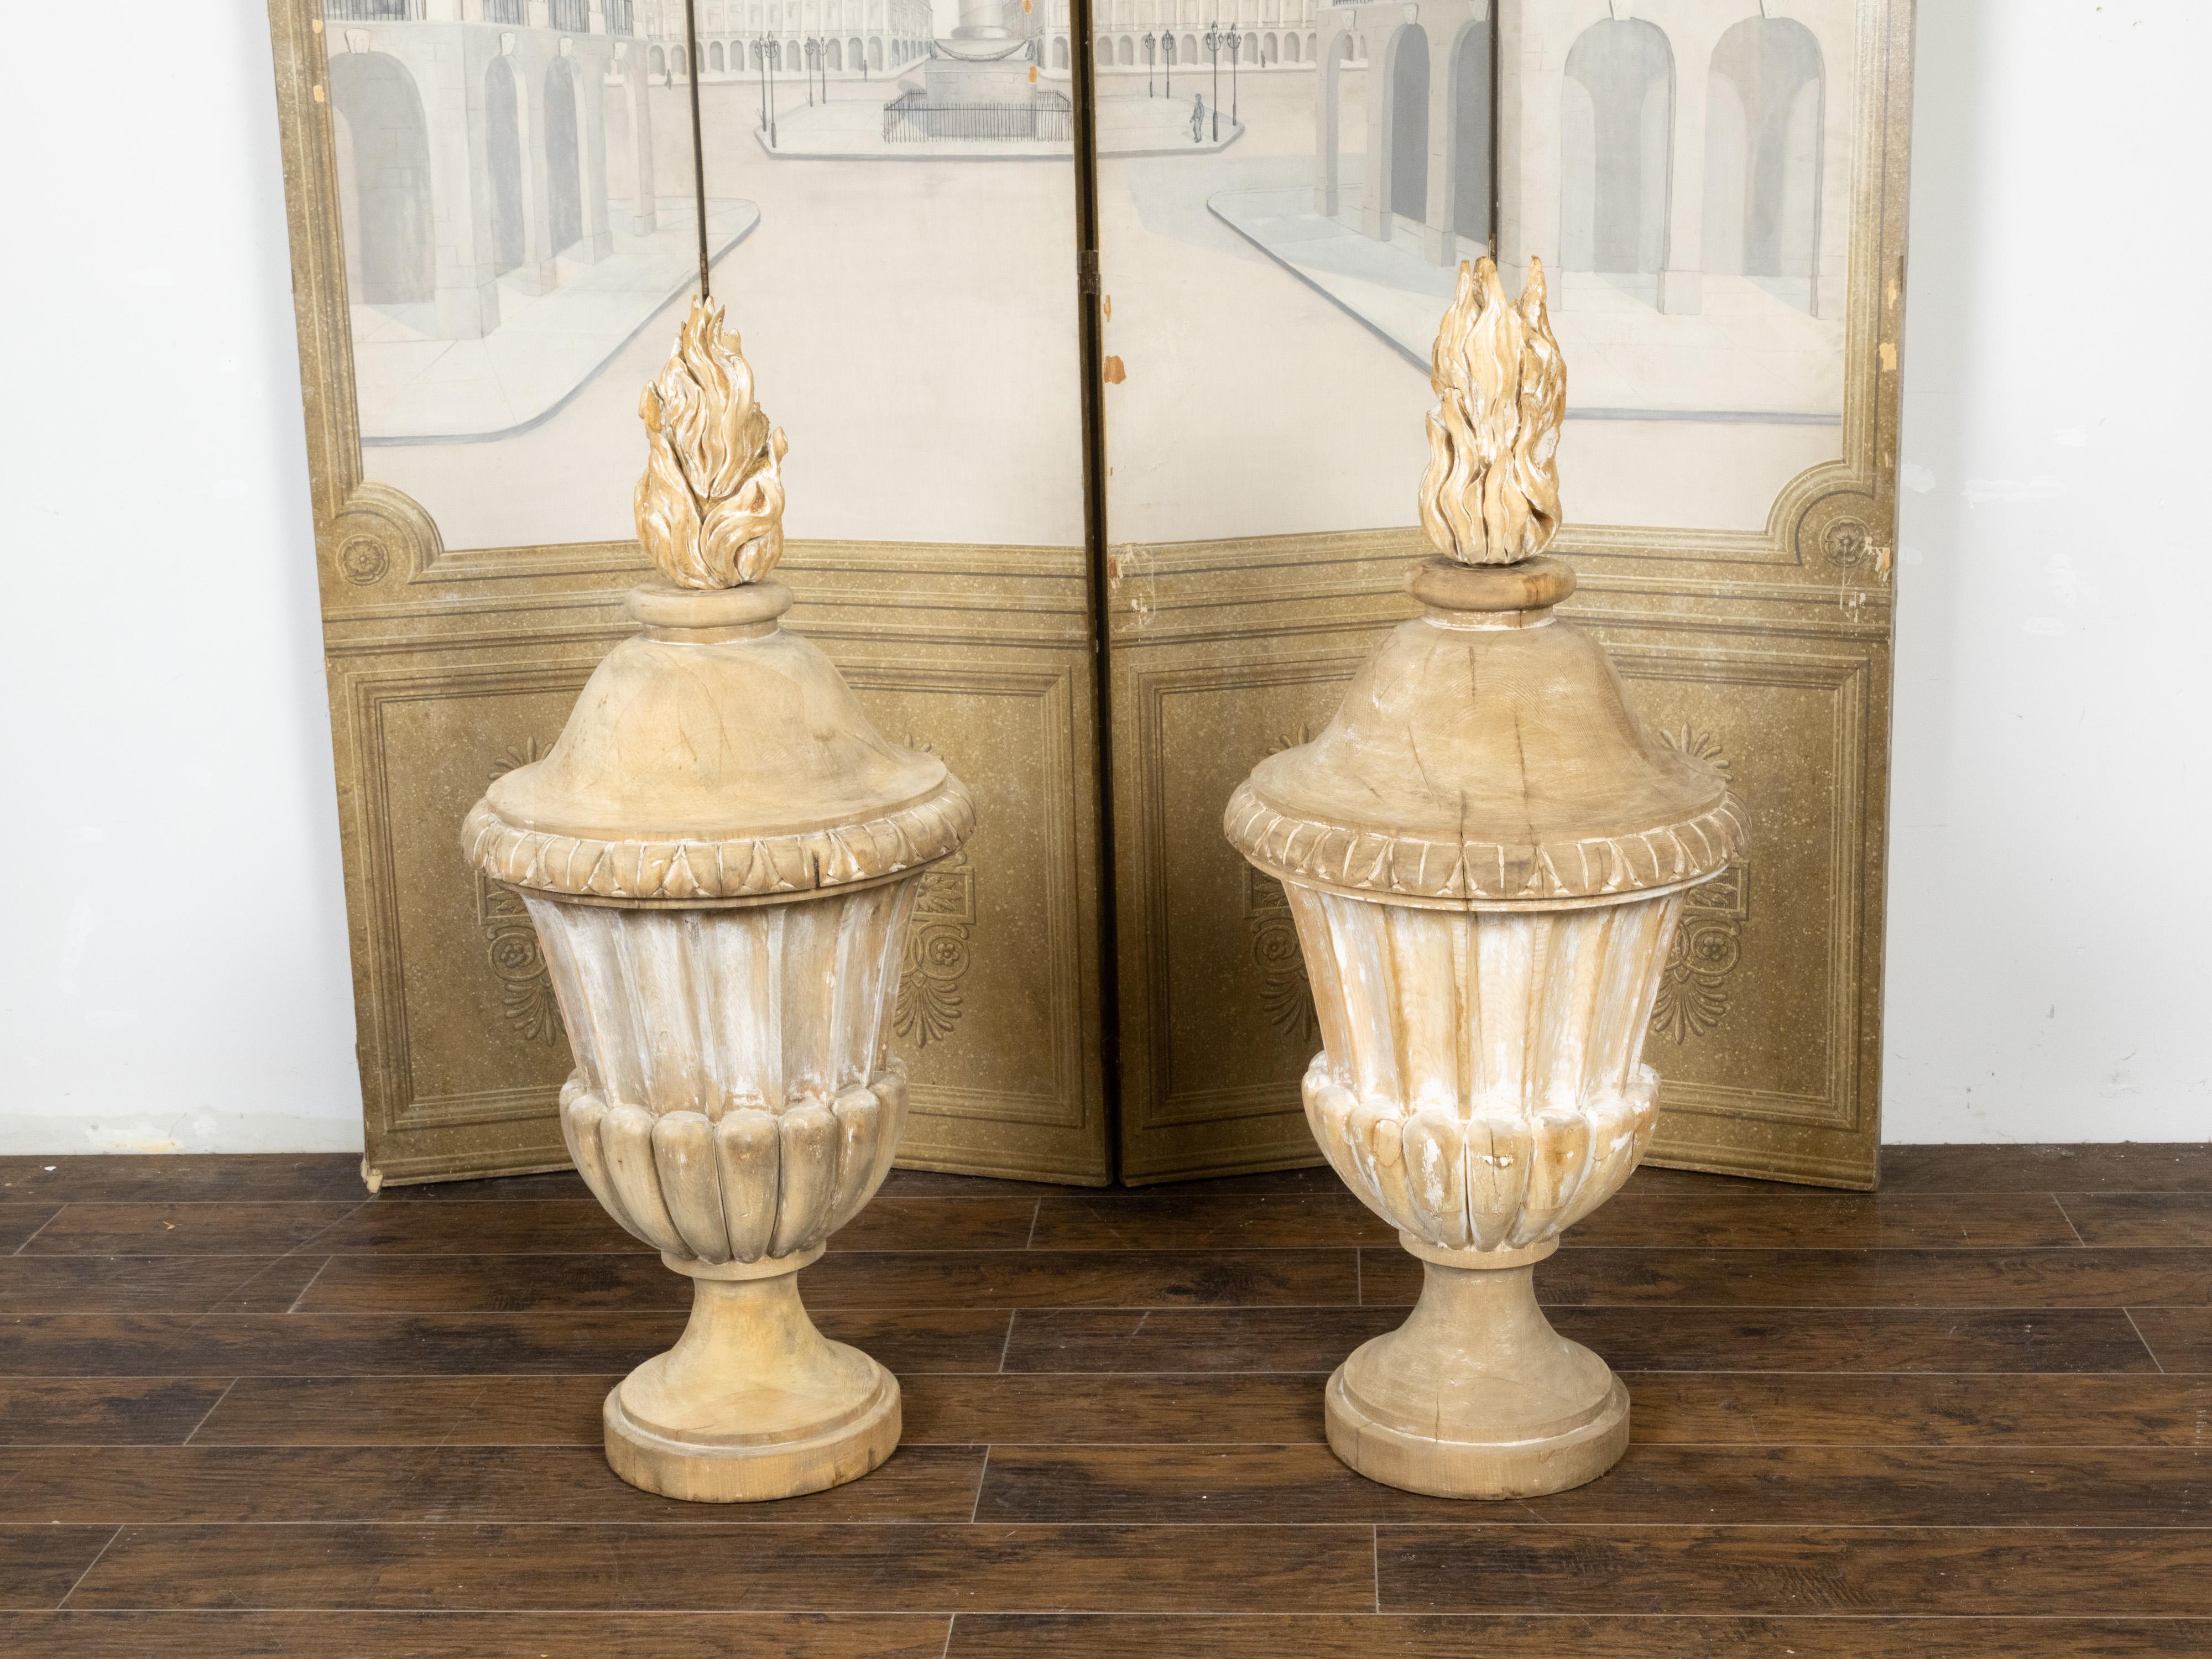 An oversized pair of French carved wooden Pots à Feu (fire pots) from the 19th century, with upper flames and fluted vases. Created in France during the 19th century, this pair of Pots à Feu (translating as fire pots, fire urns in English) brings us